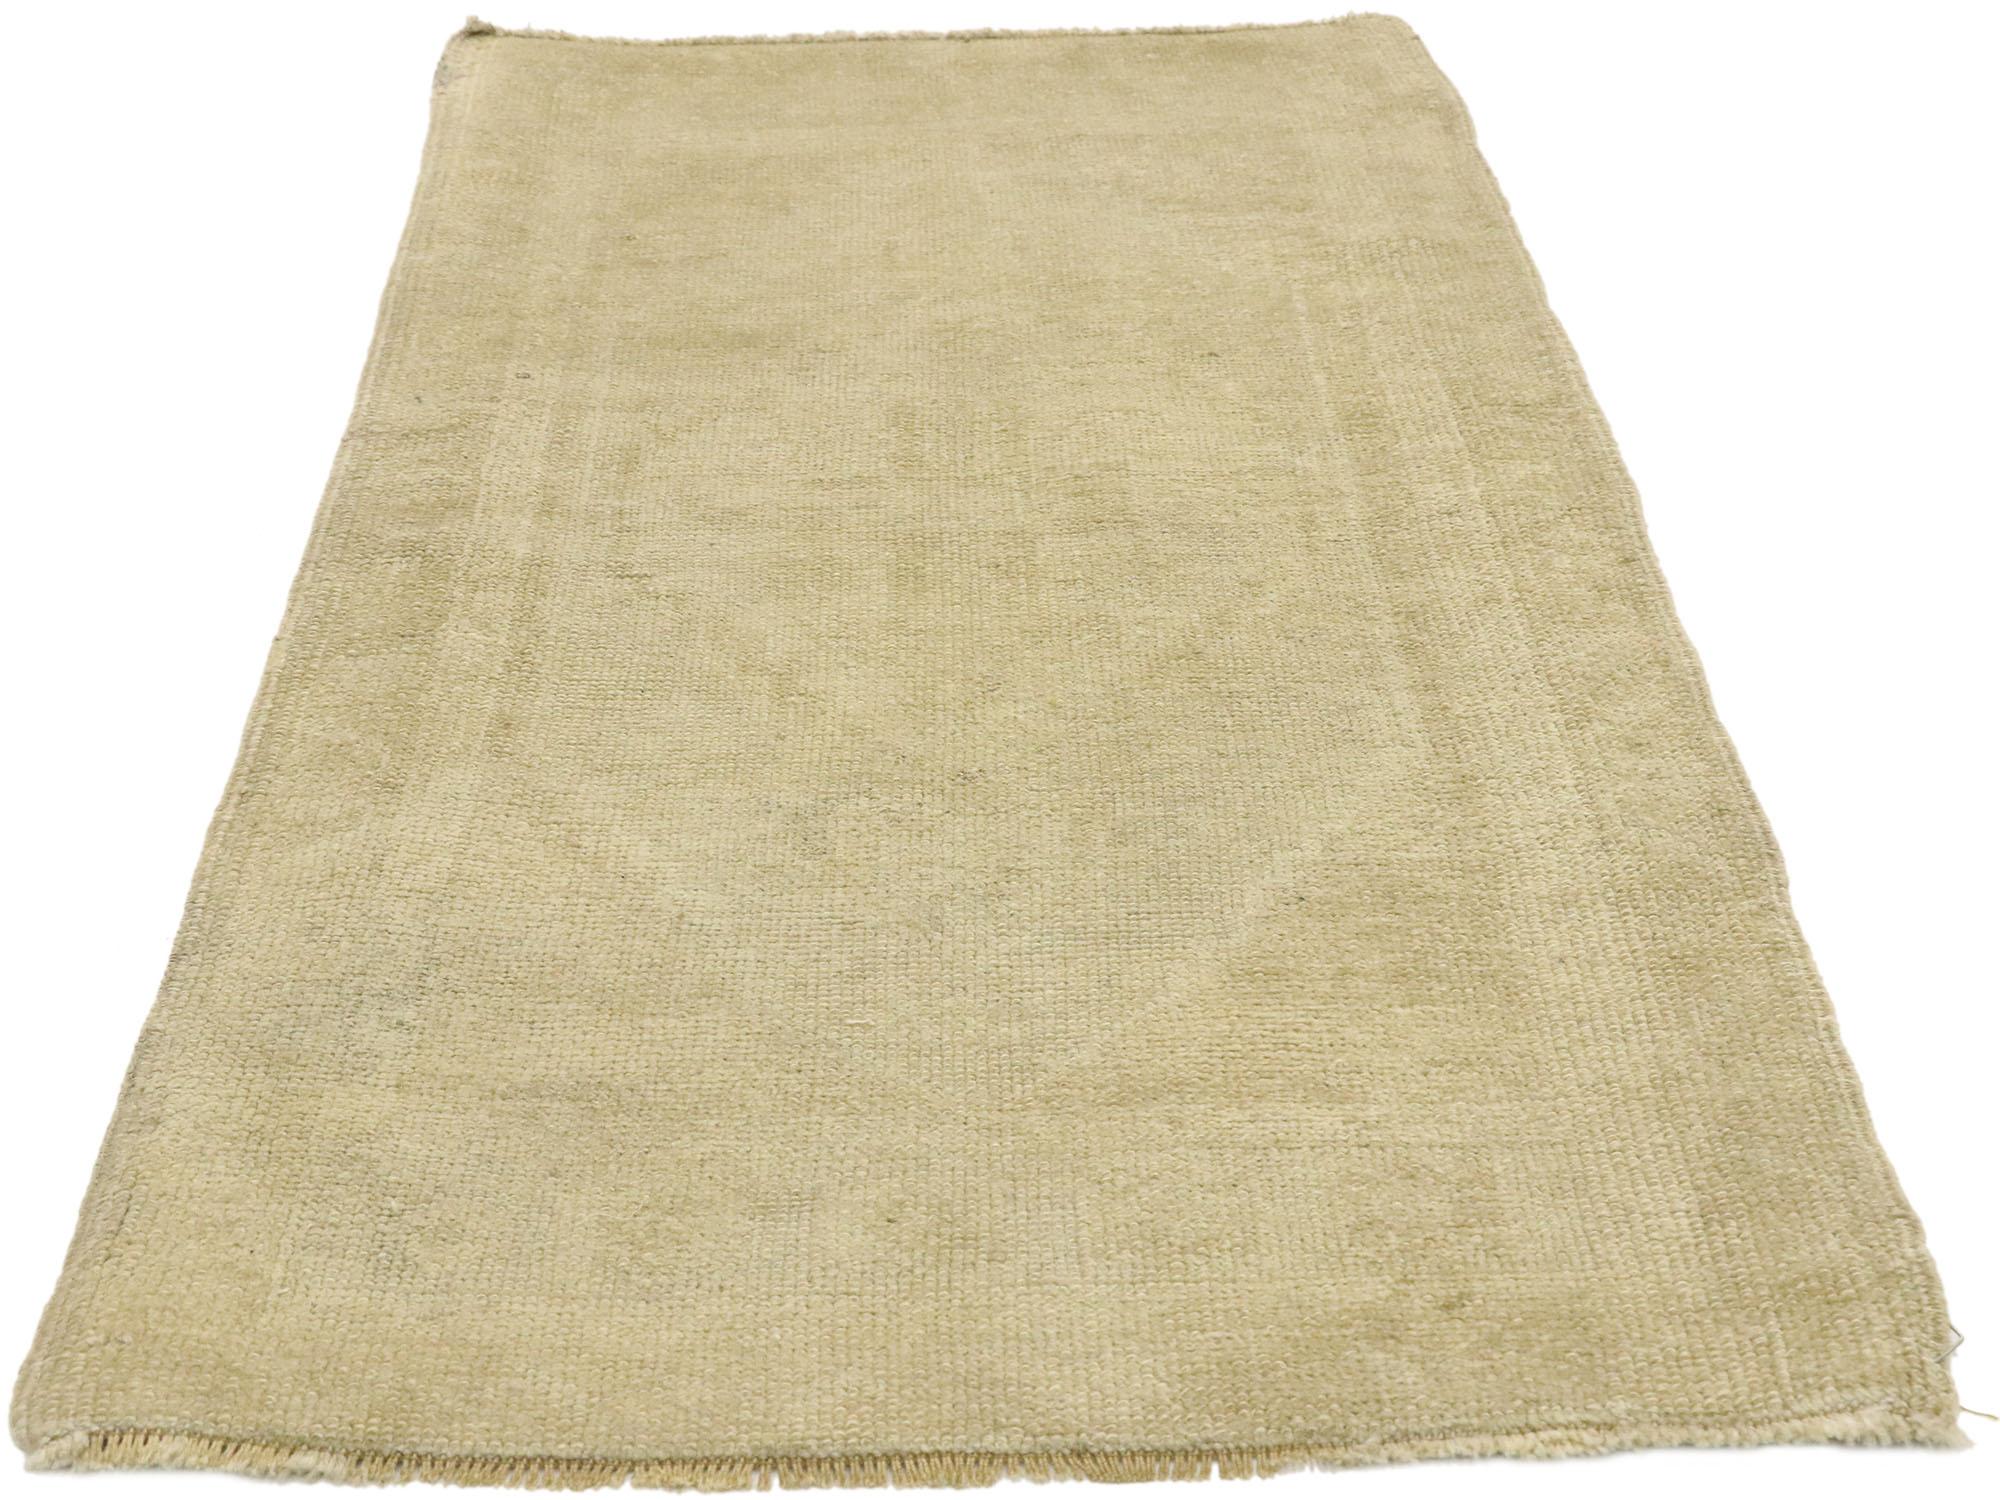 Hand-Knotted Vintage Turkish Oushak Yastik Scatter Rug with Monochromatic Mission Style